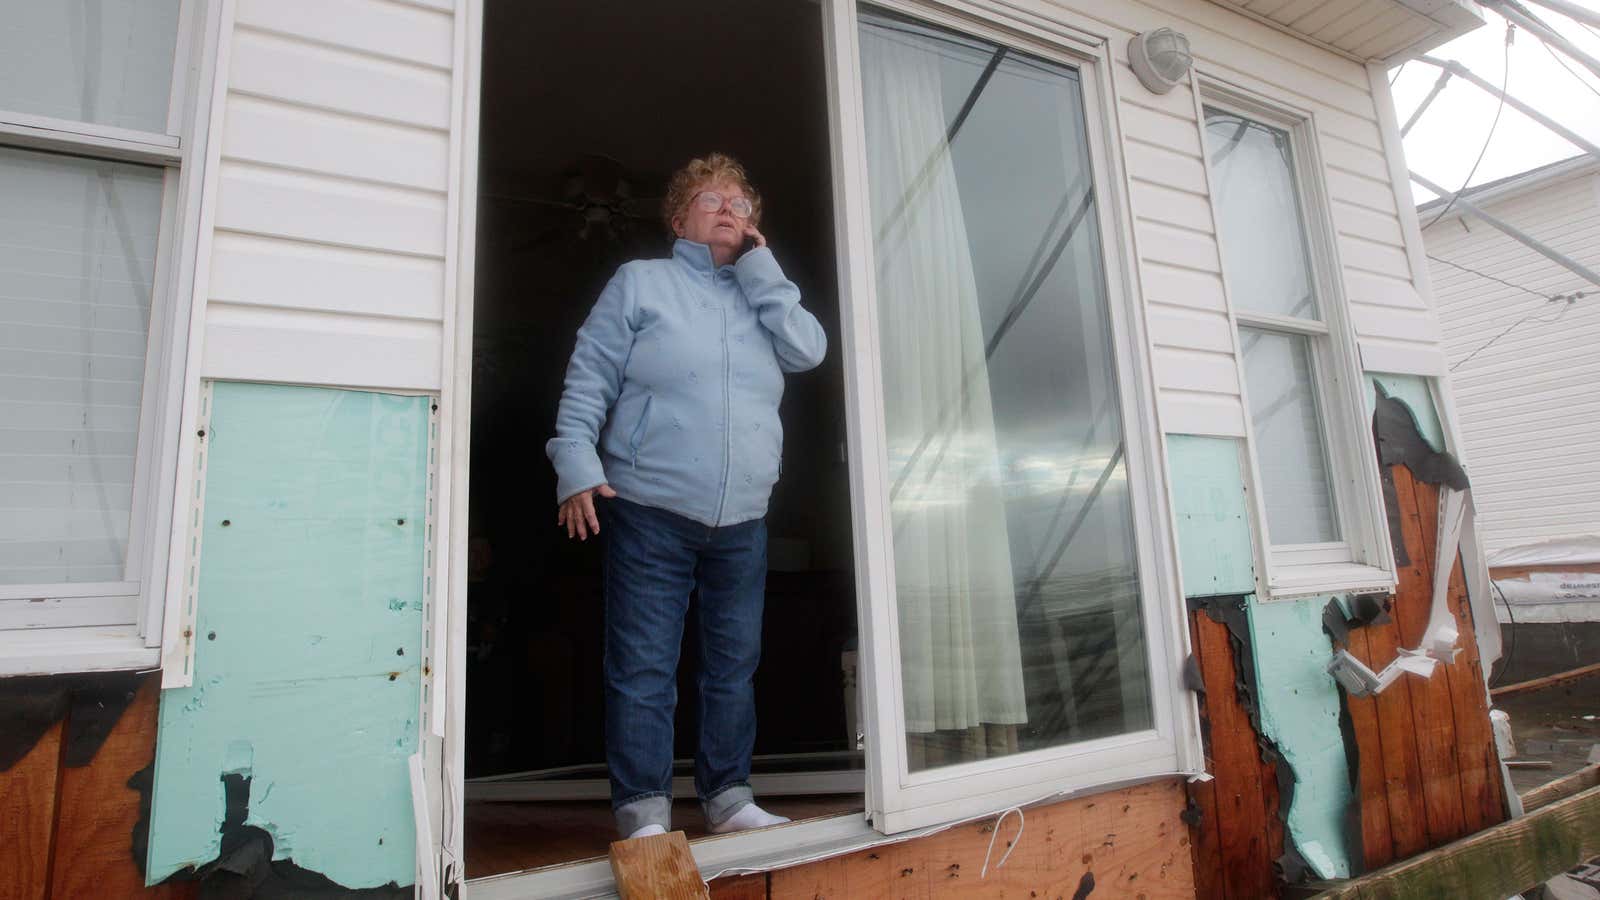 Kathy Jones calls her family after her home was damaged during Hurricane Sandy